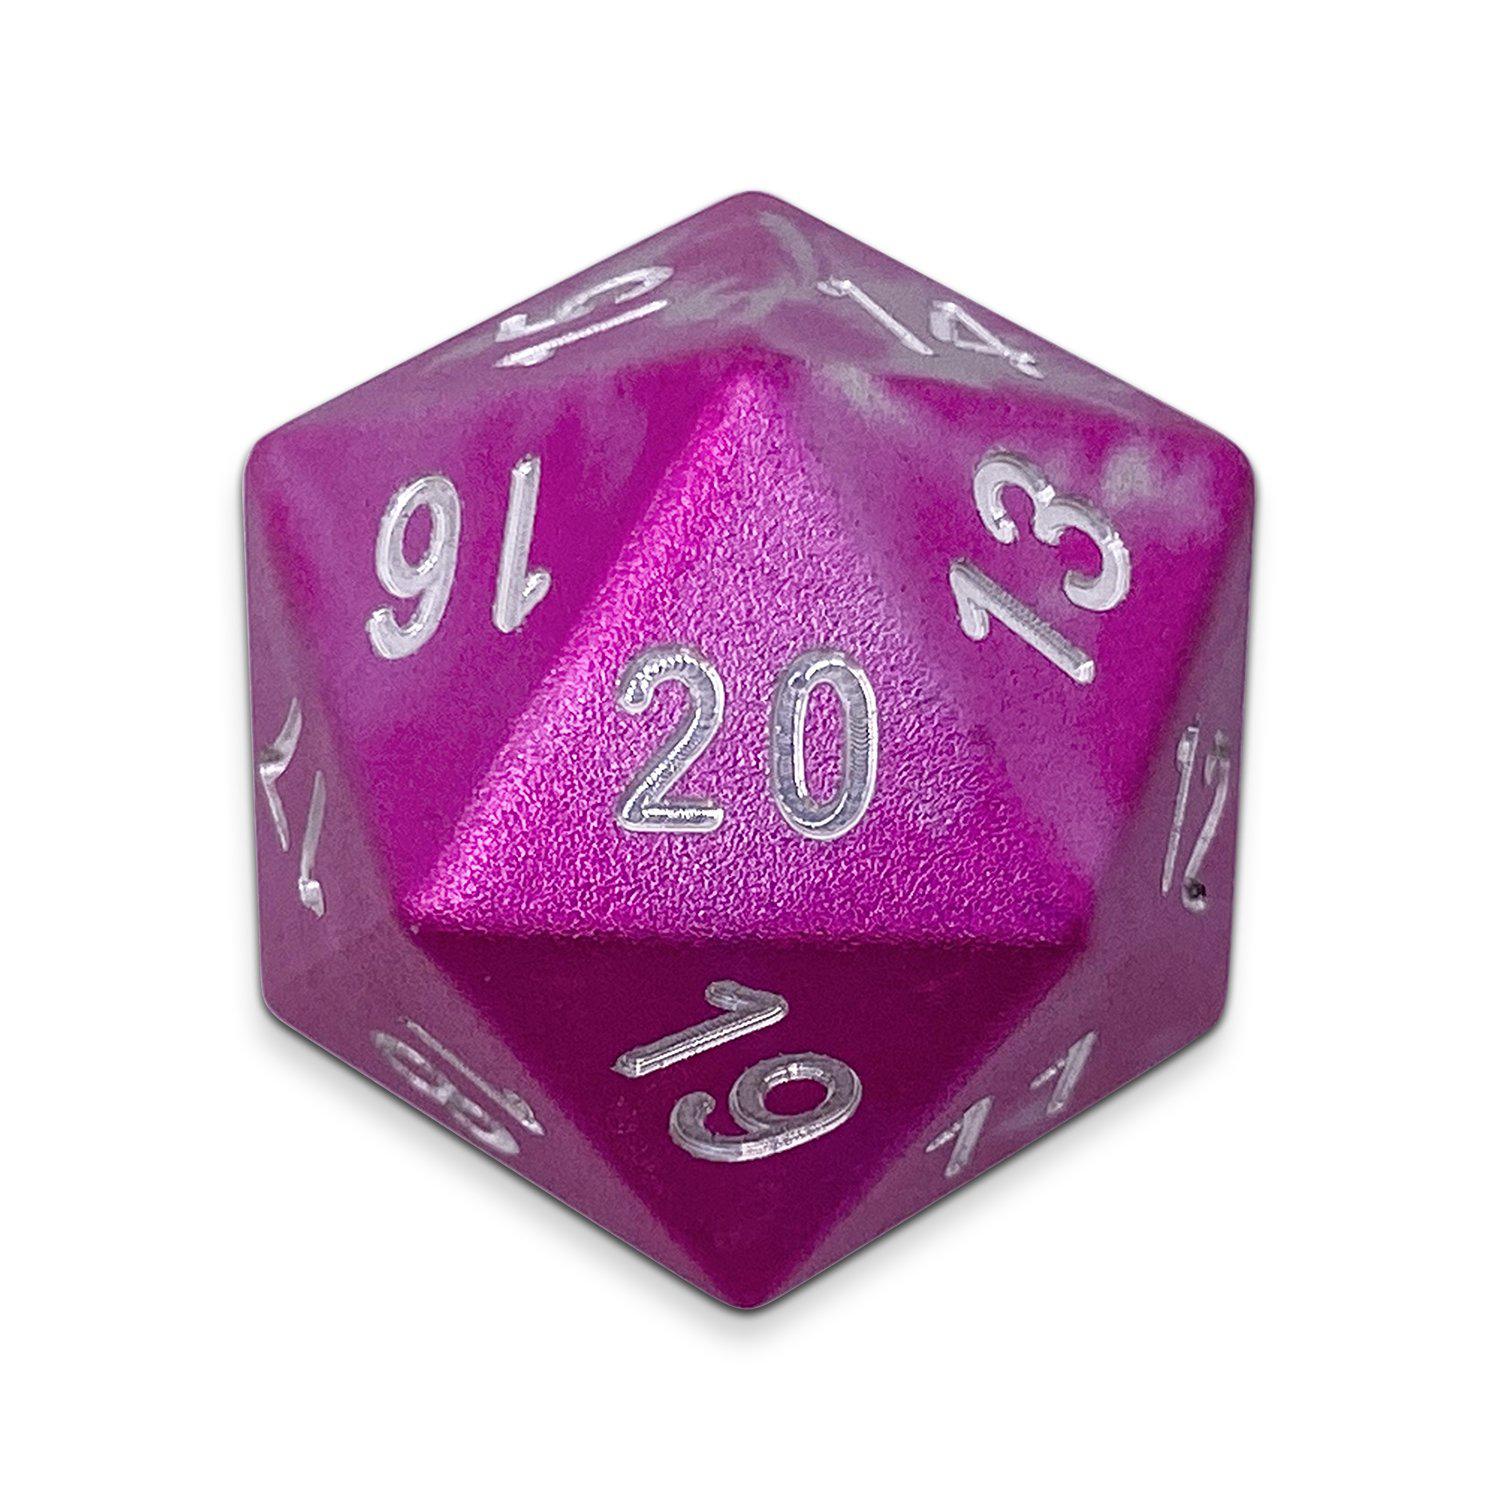 Wondrous Dice® Countdown D20 in Sugar Bomb by Norse Foundry 6063 Aircraft Grade Aluminum - NOR 02451